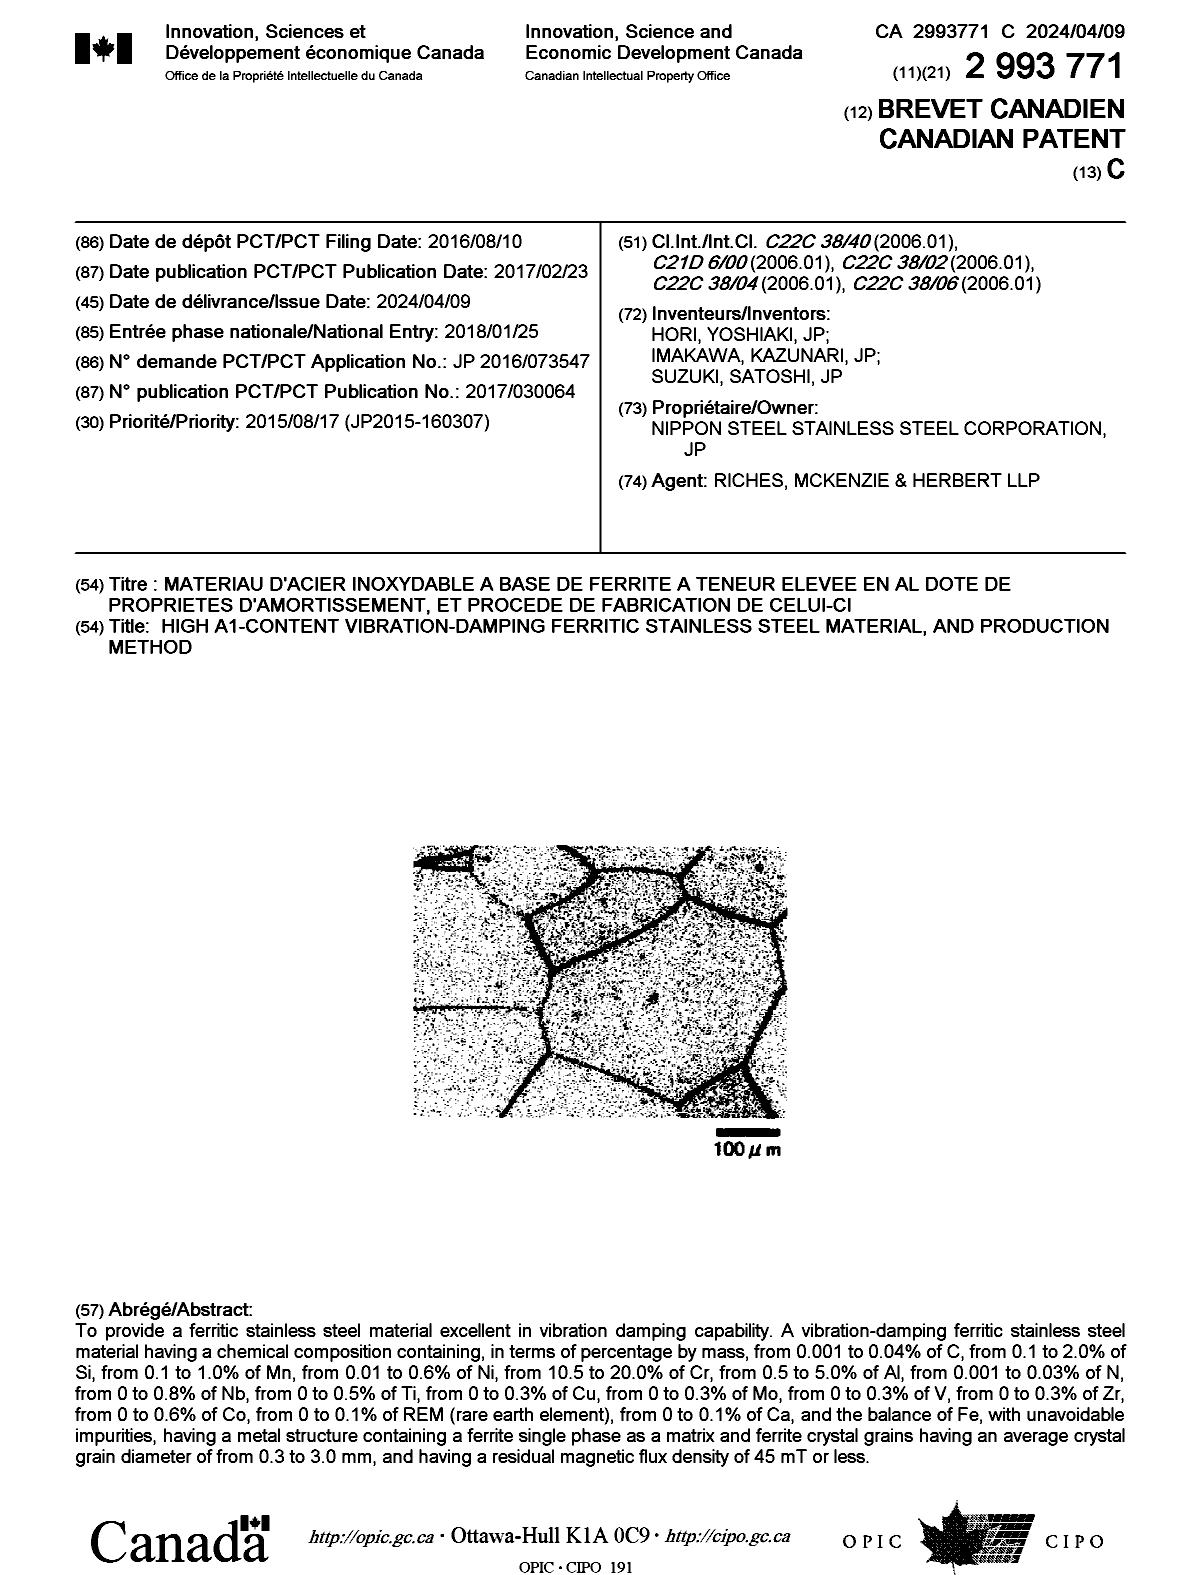 Canadian Patent Document 2993771. Cover Page 20240307. Image 1 of 1